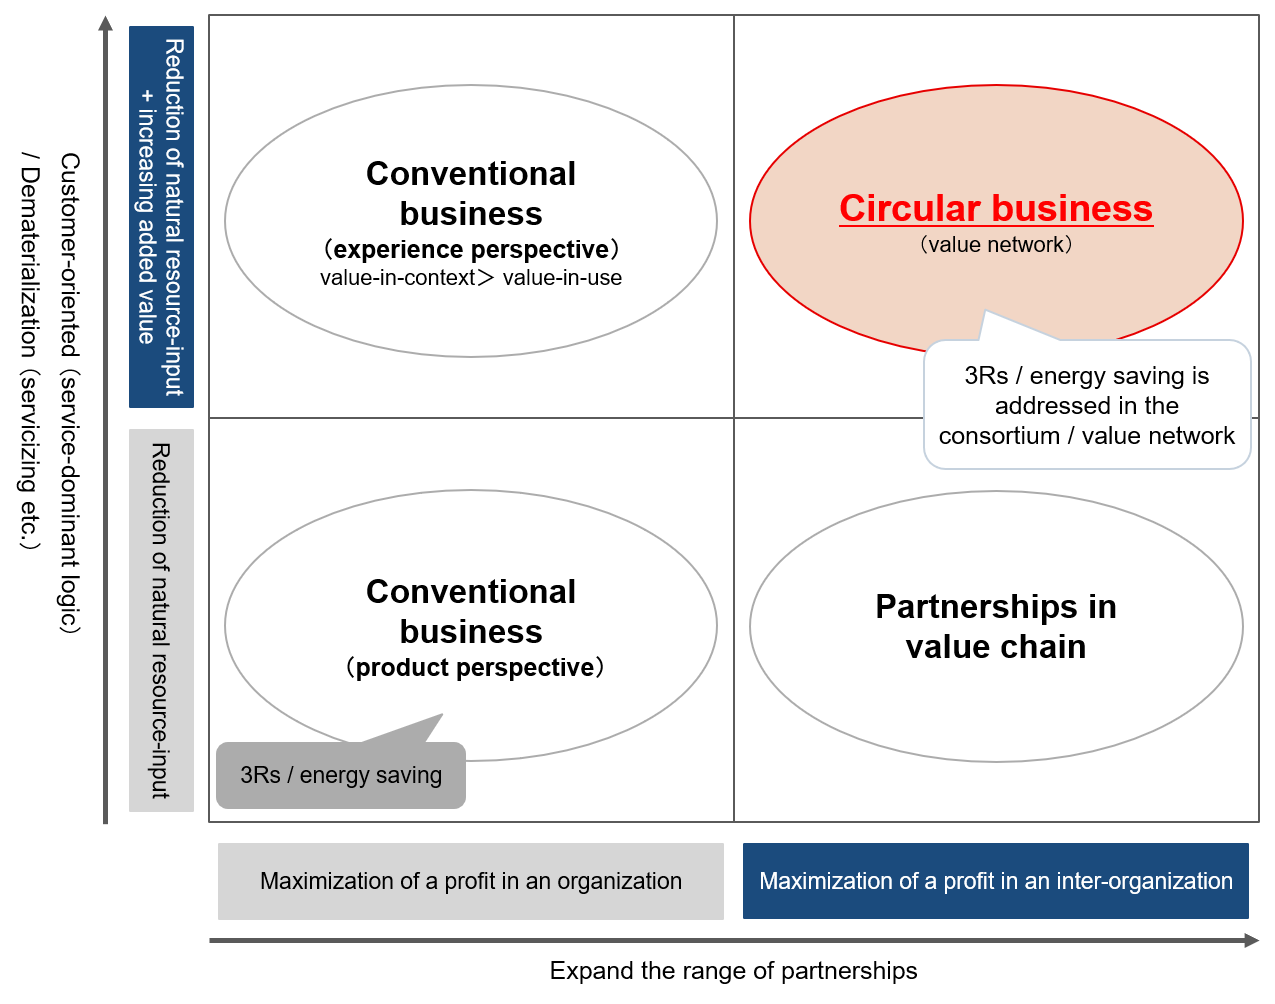 Difference between conventional business and the circular economy business